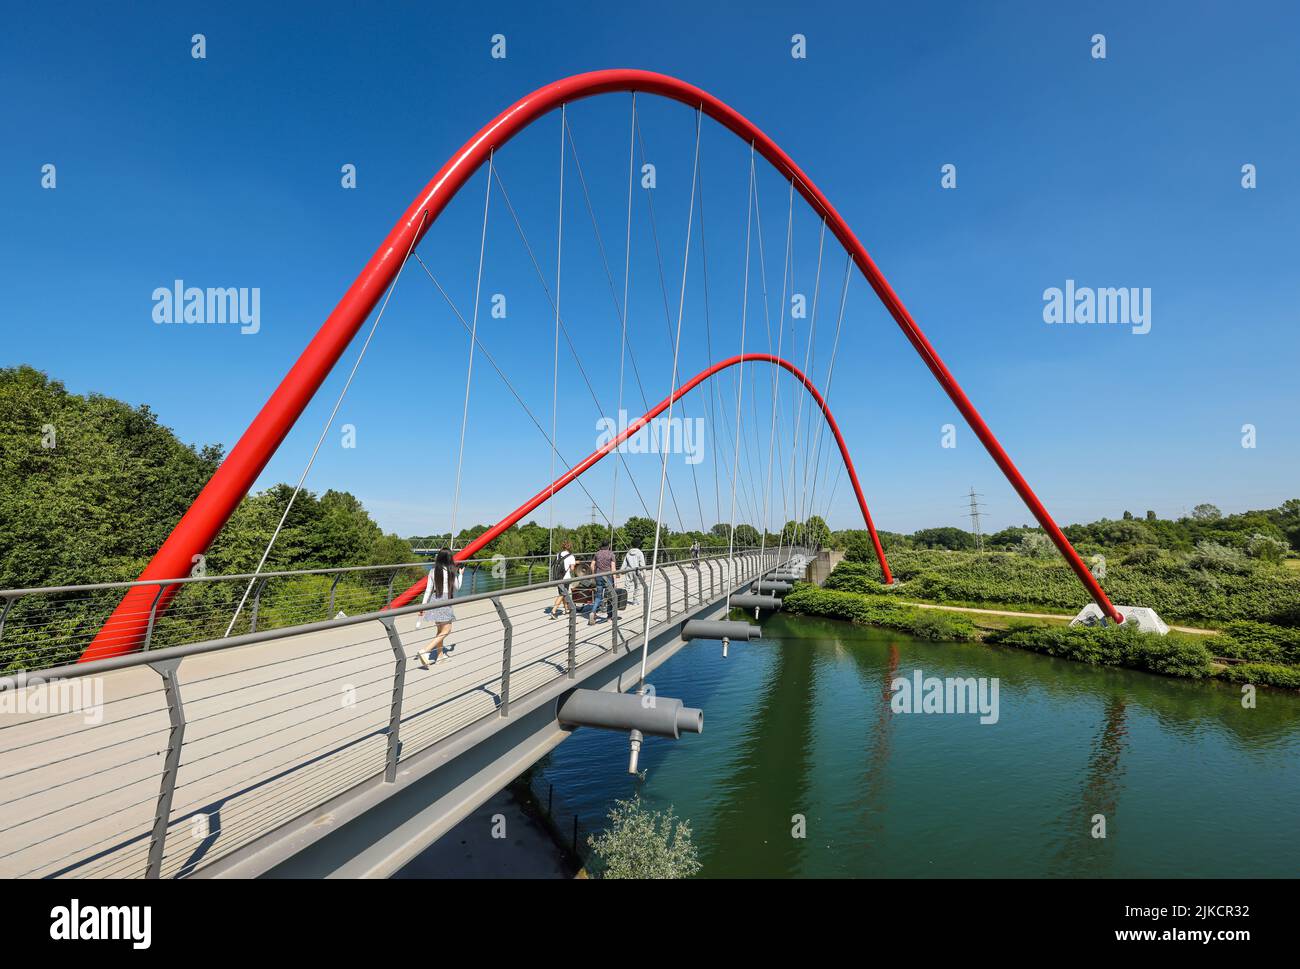 Gelsenkirchen, North Rhine-Westphalia, Germany - Nordsternpark, here with the double arch bridge on the Rhine-Herne canal. Parks and gardens in the Ru Stock Photo